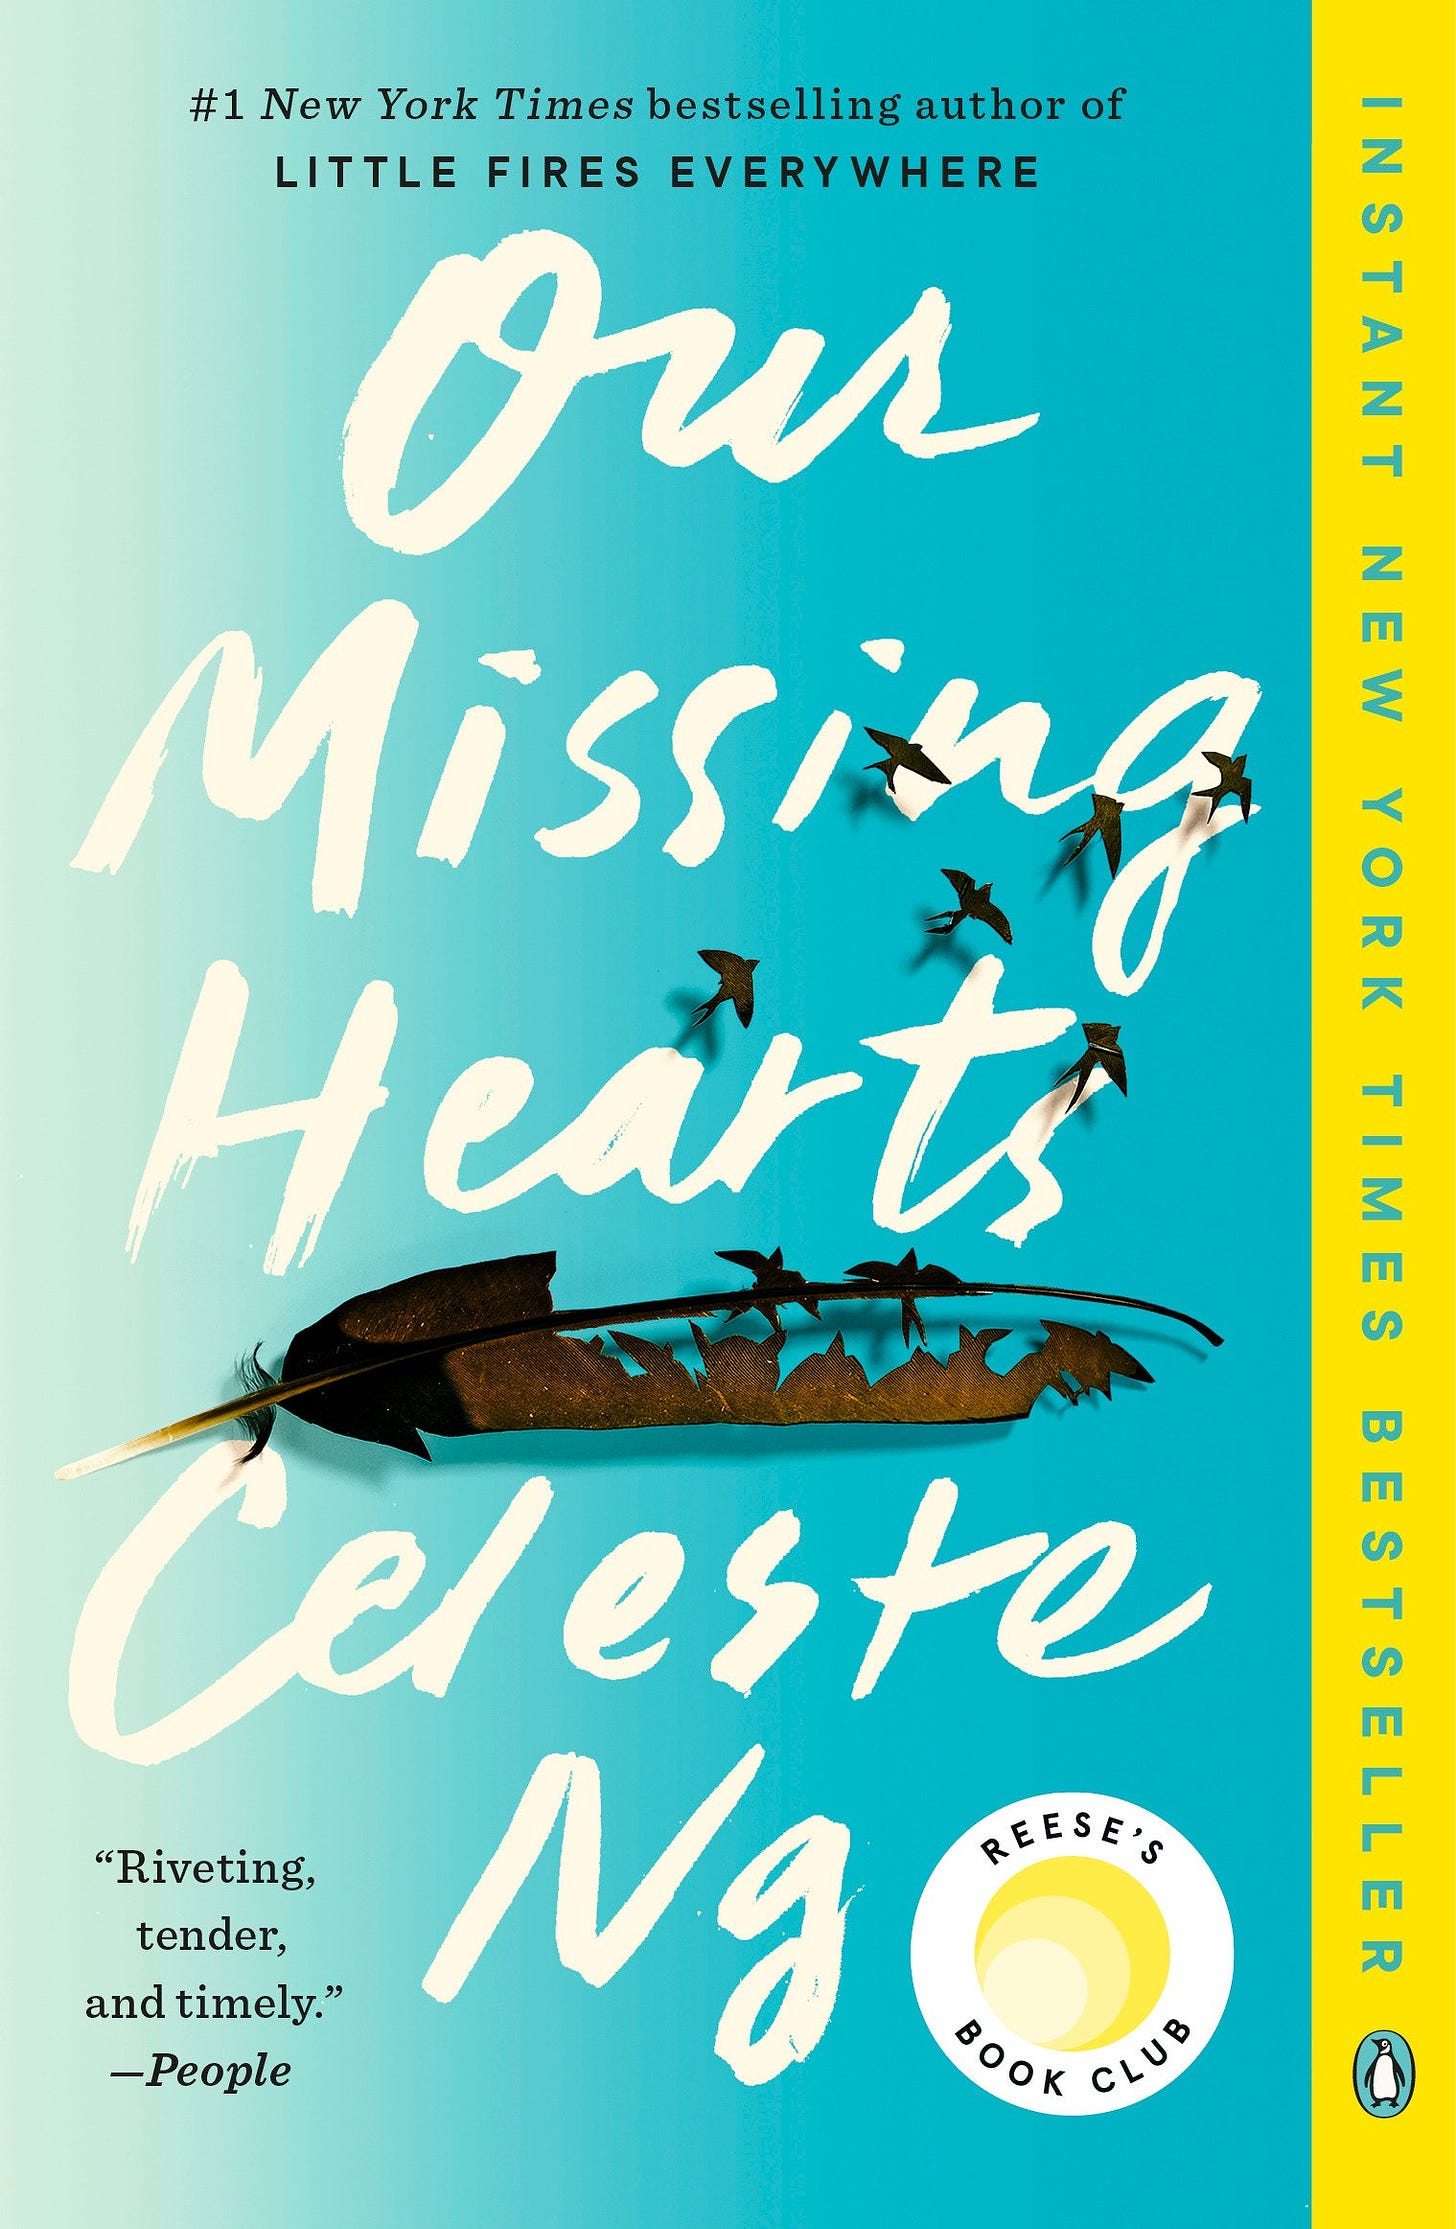 Cover of "Our Missing Hearts" by Celeste Ng.